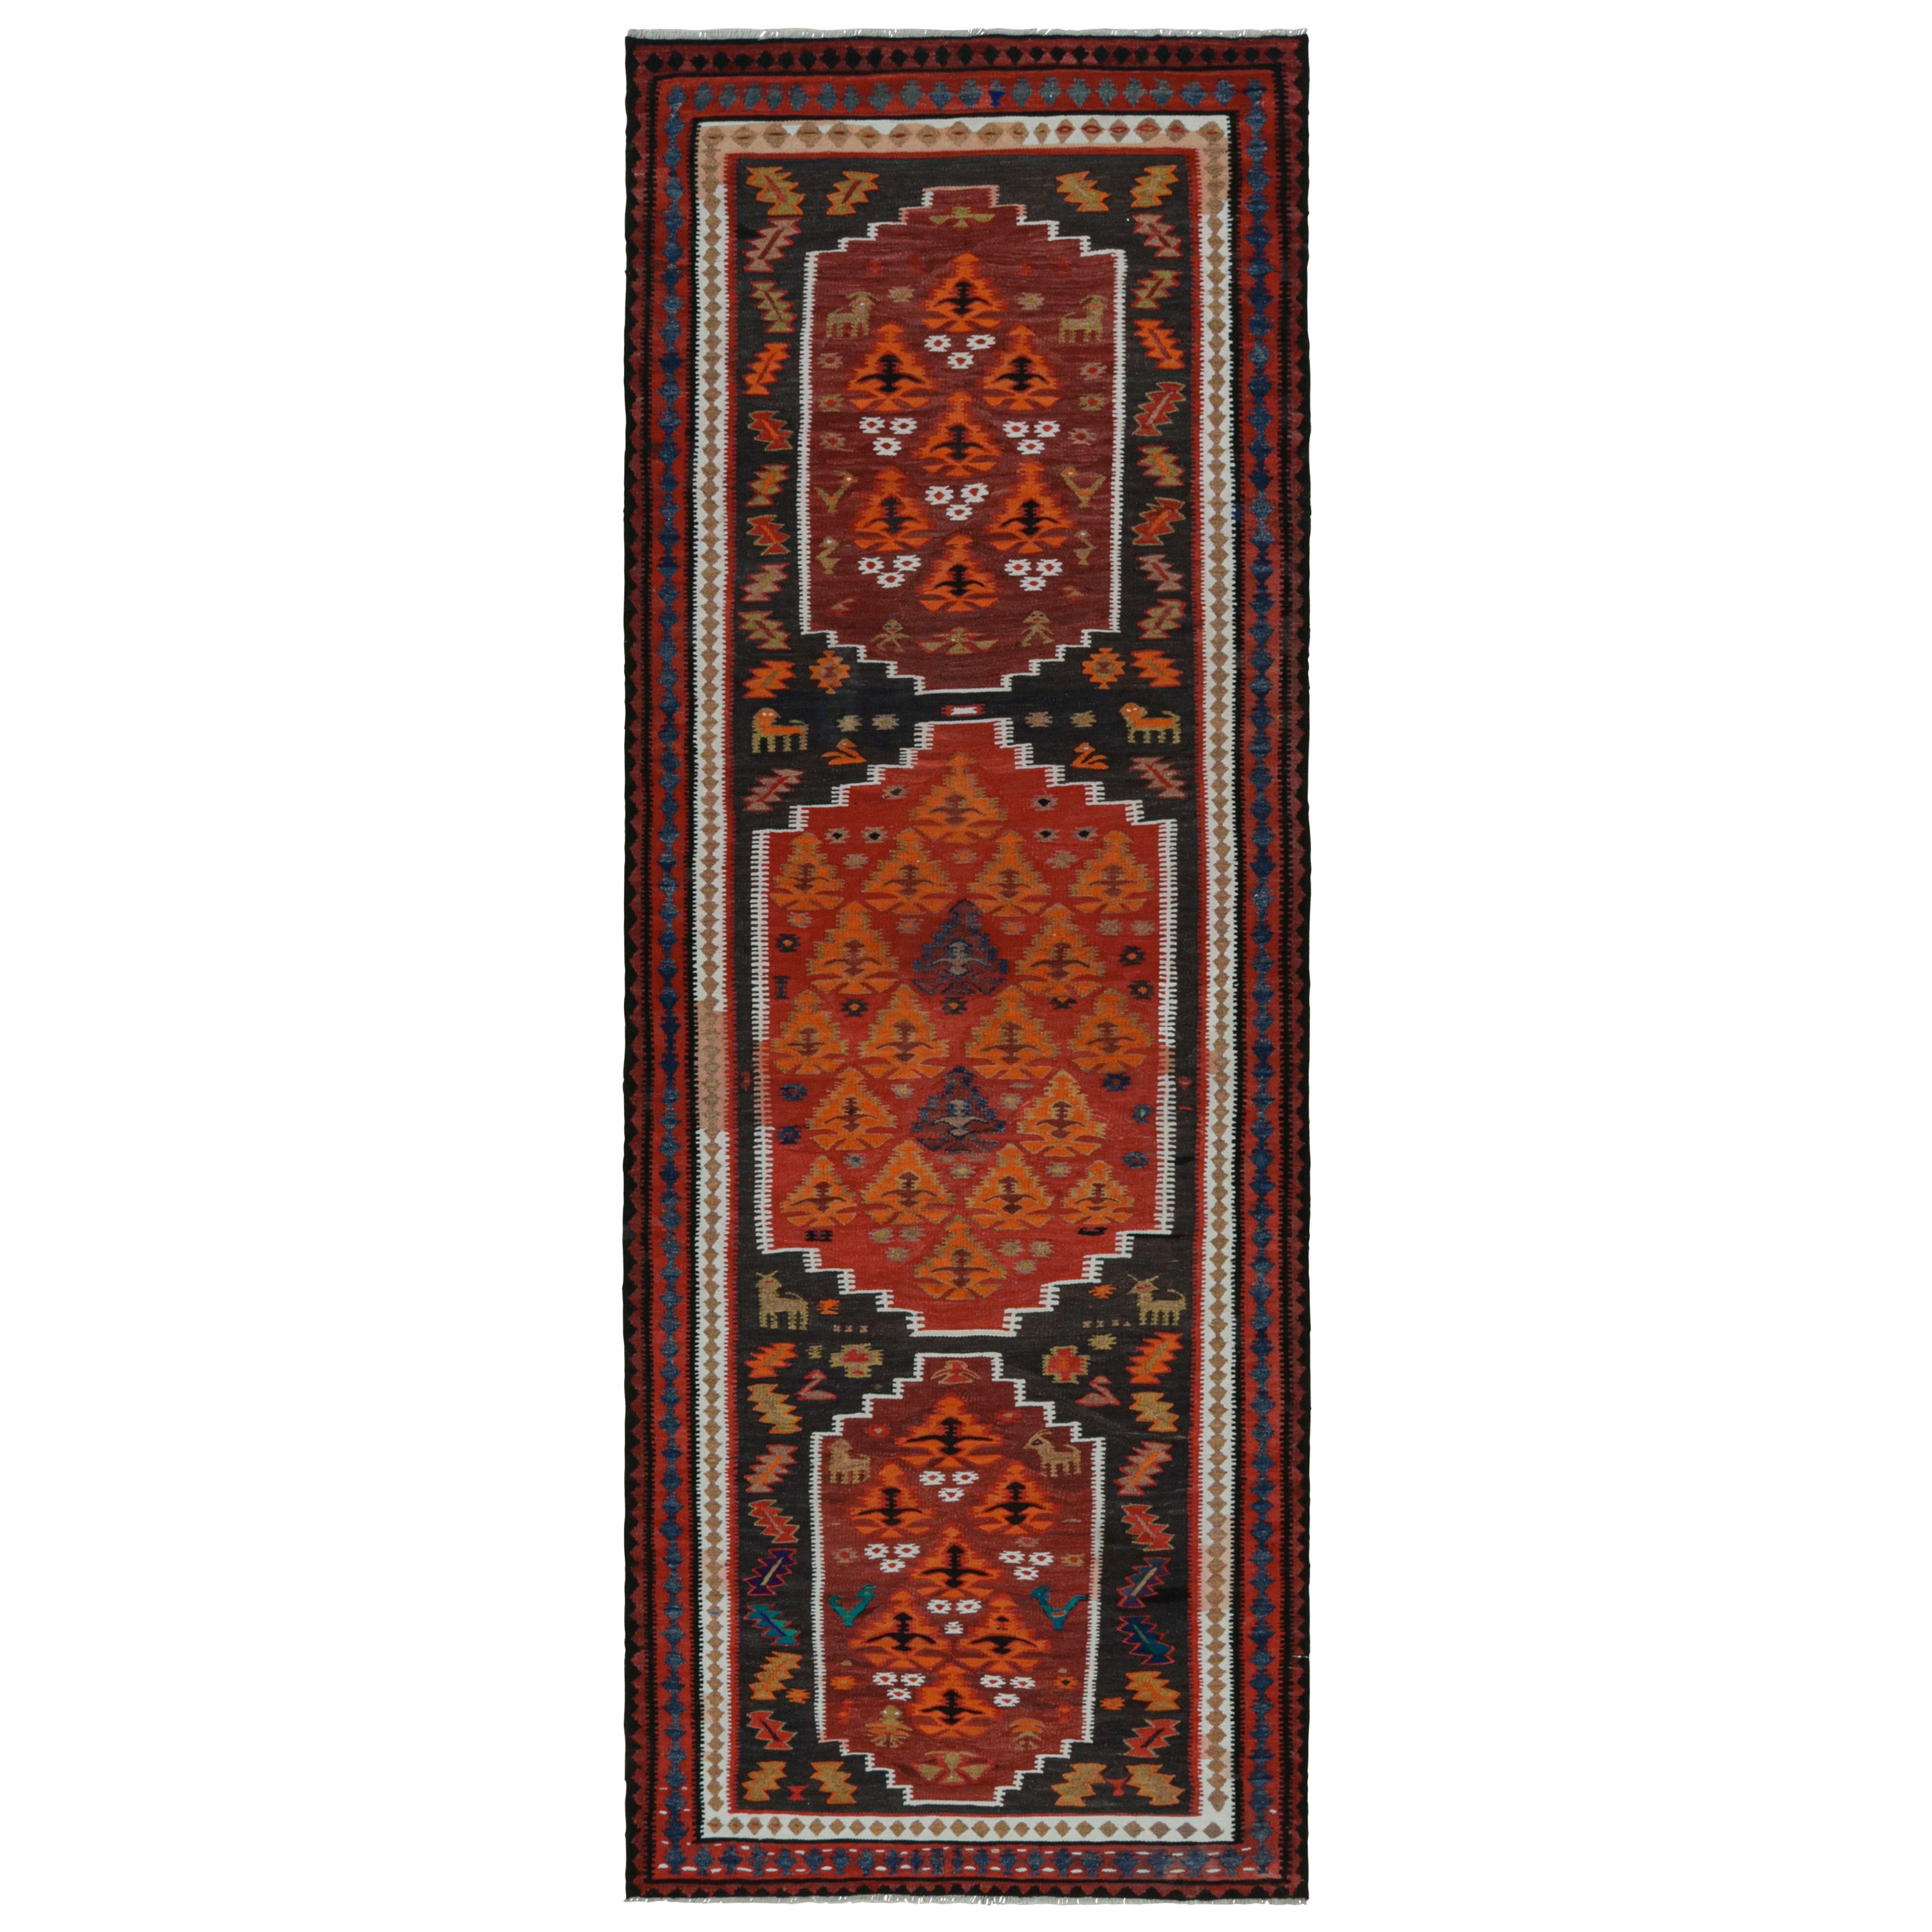 Vintage tribal Persian Kilim runner rug, with Pictorial motifs, from Rug & Kilim